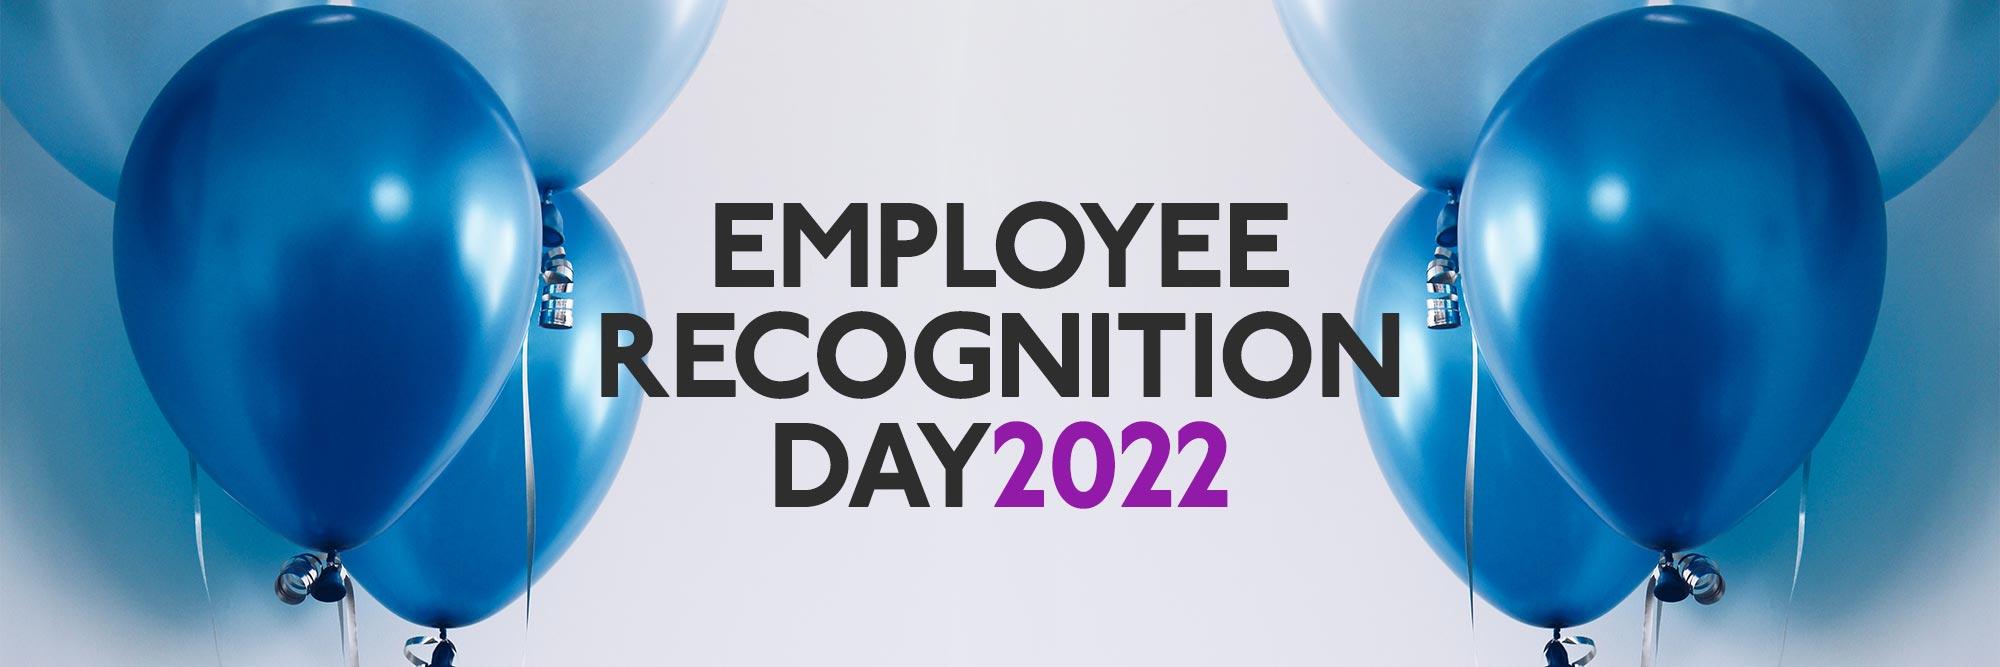 Employee Recognition Day 2022